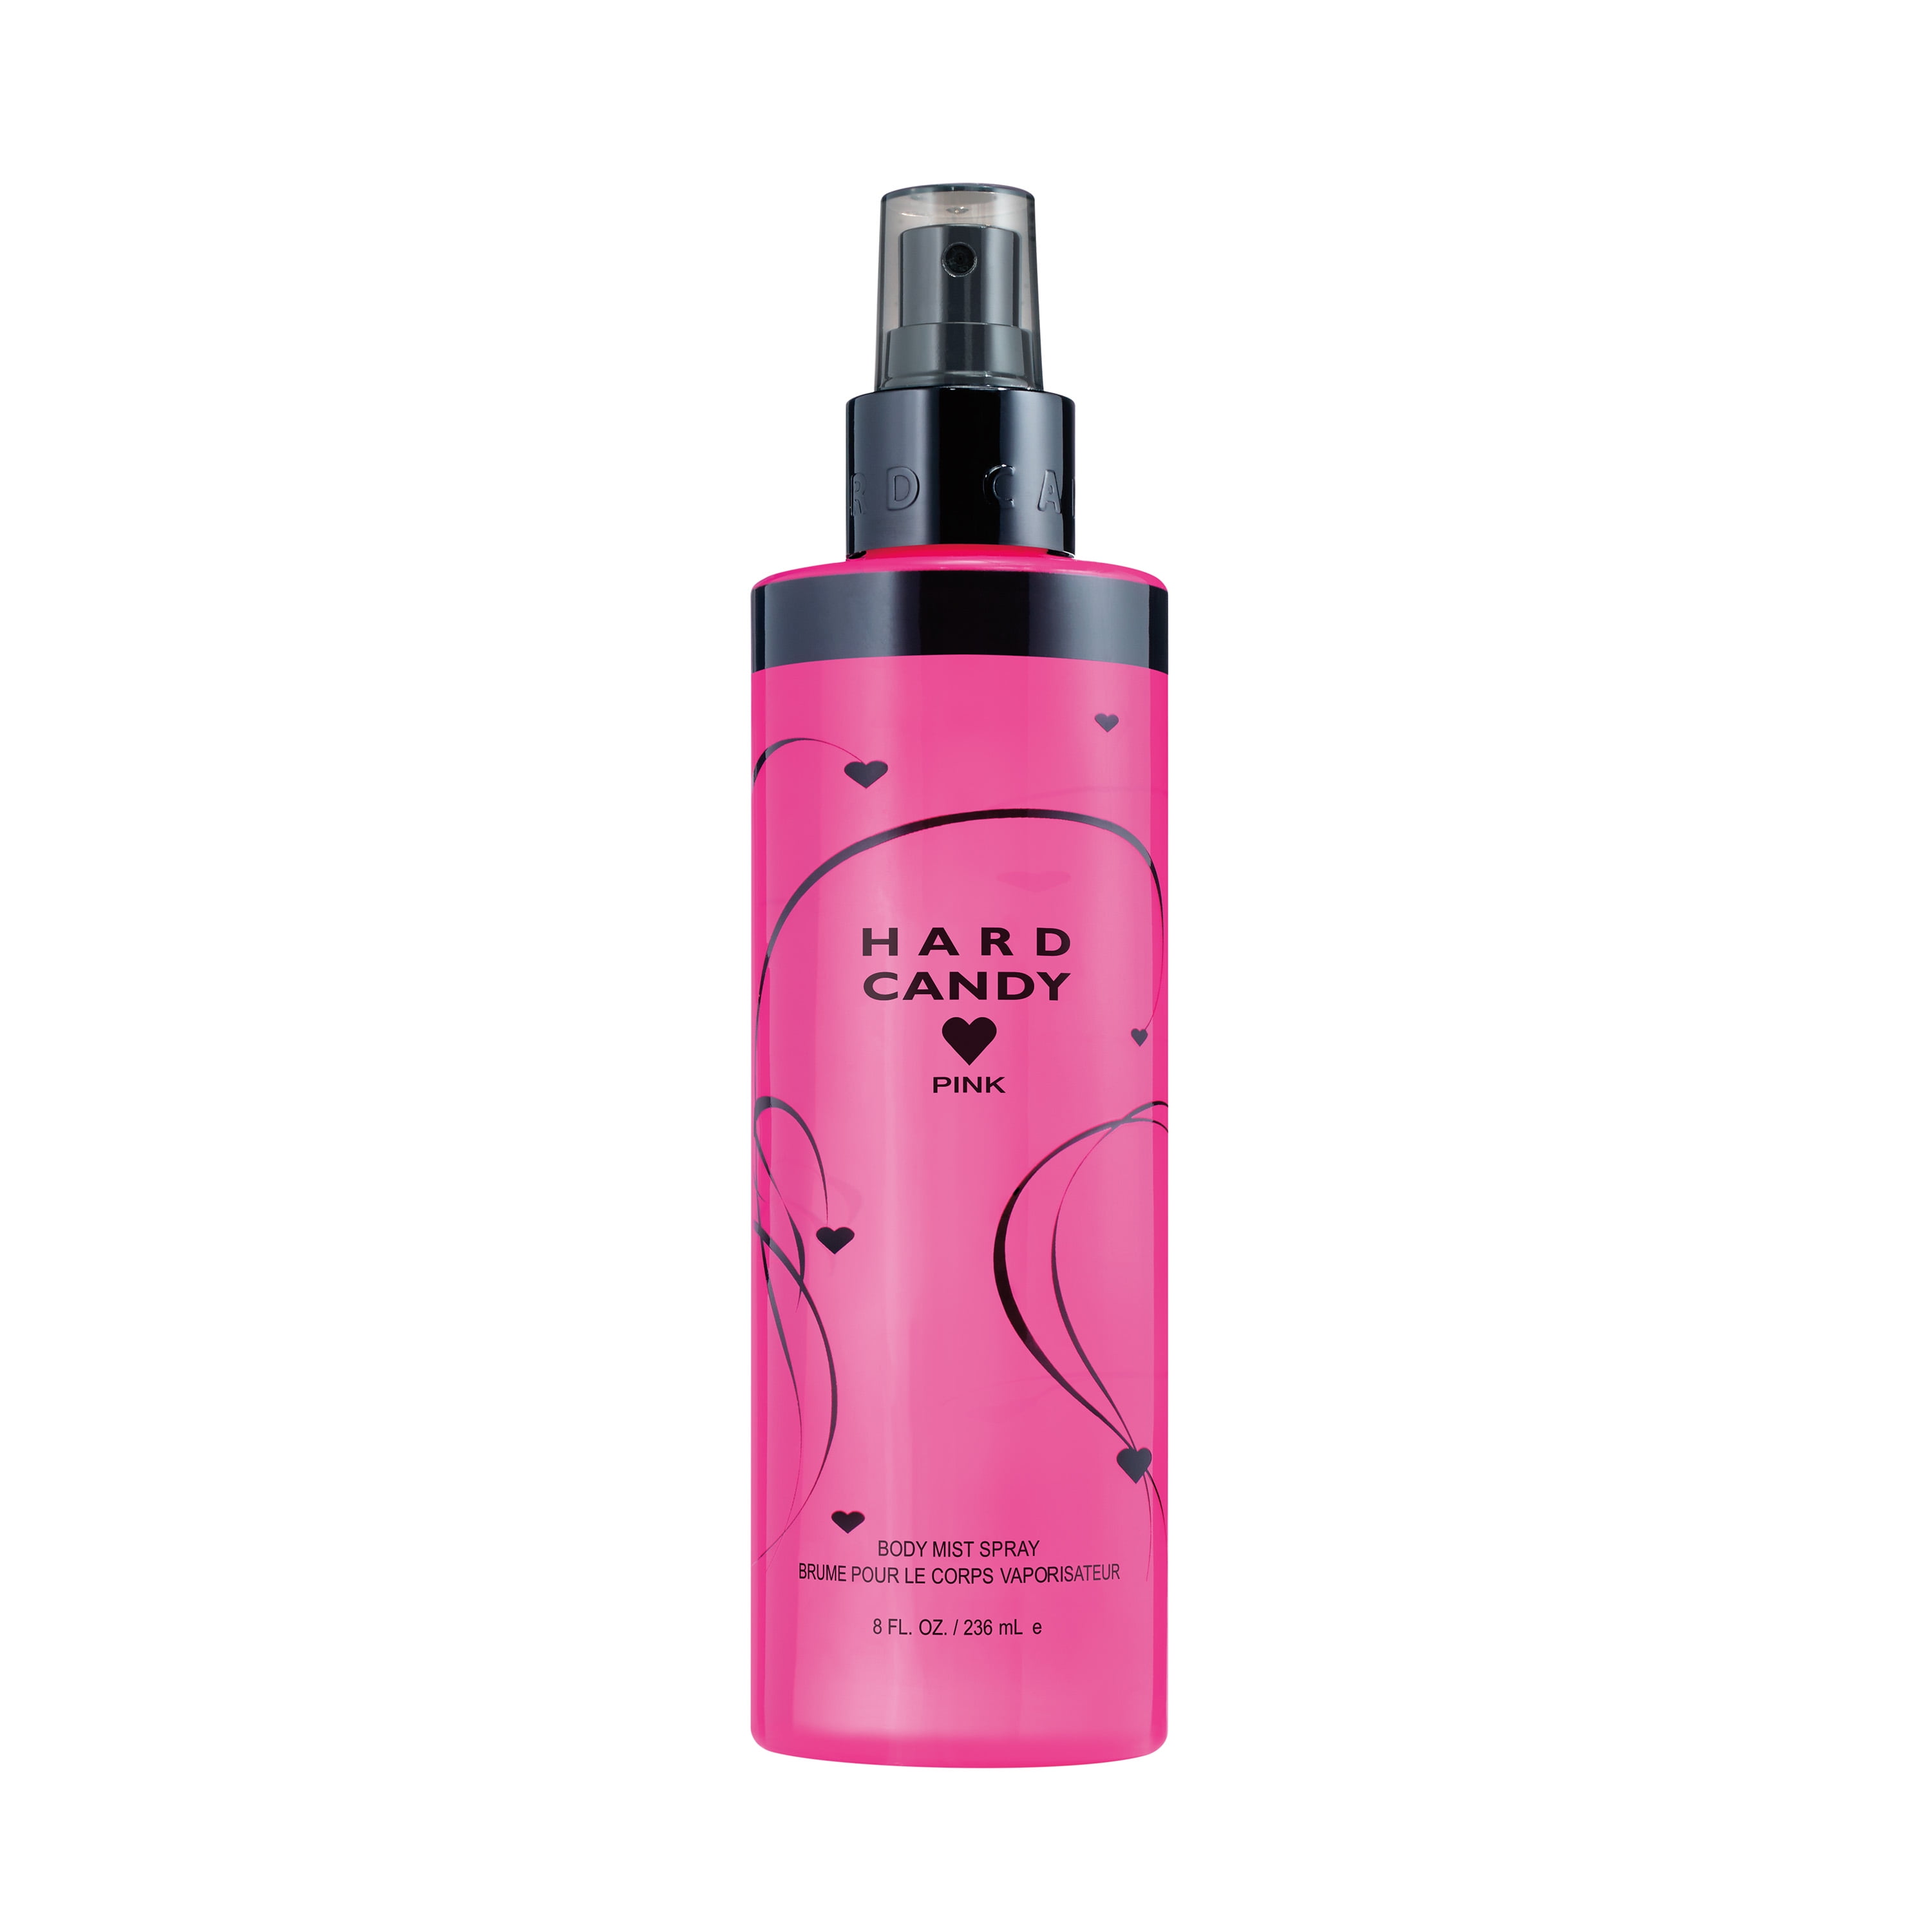 Hard Candy Pink Fragrance Body Mist for 